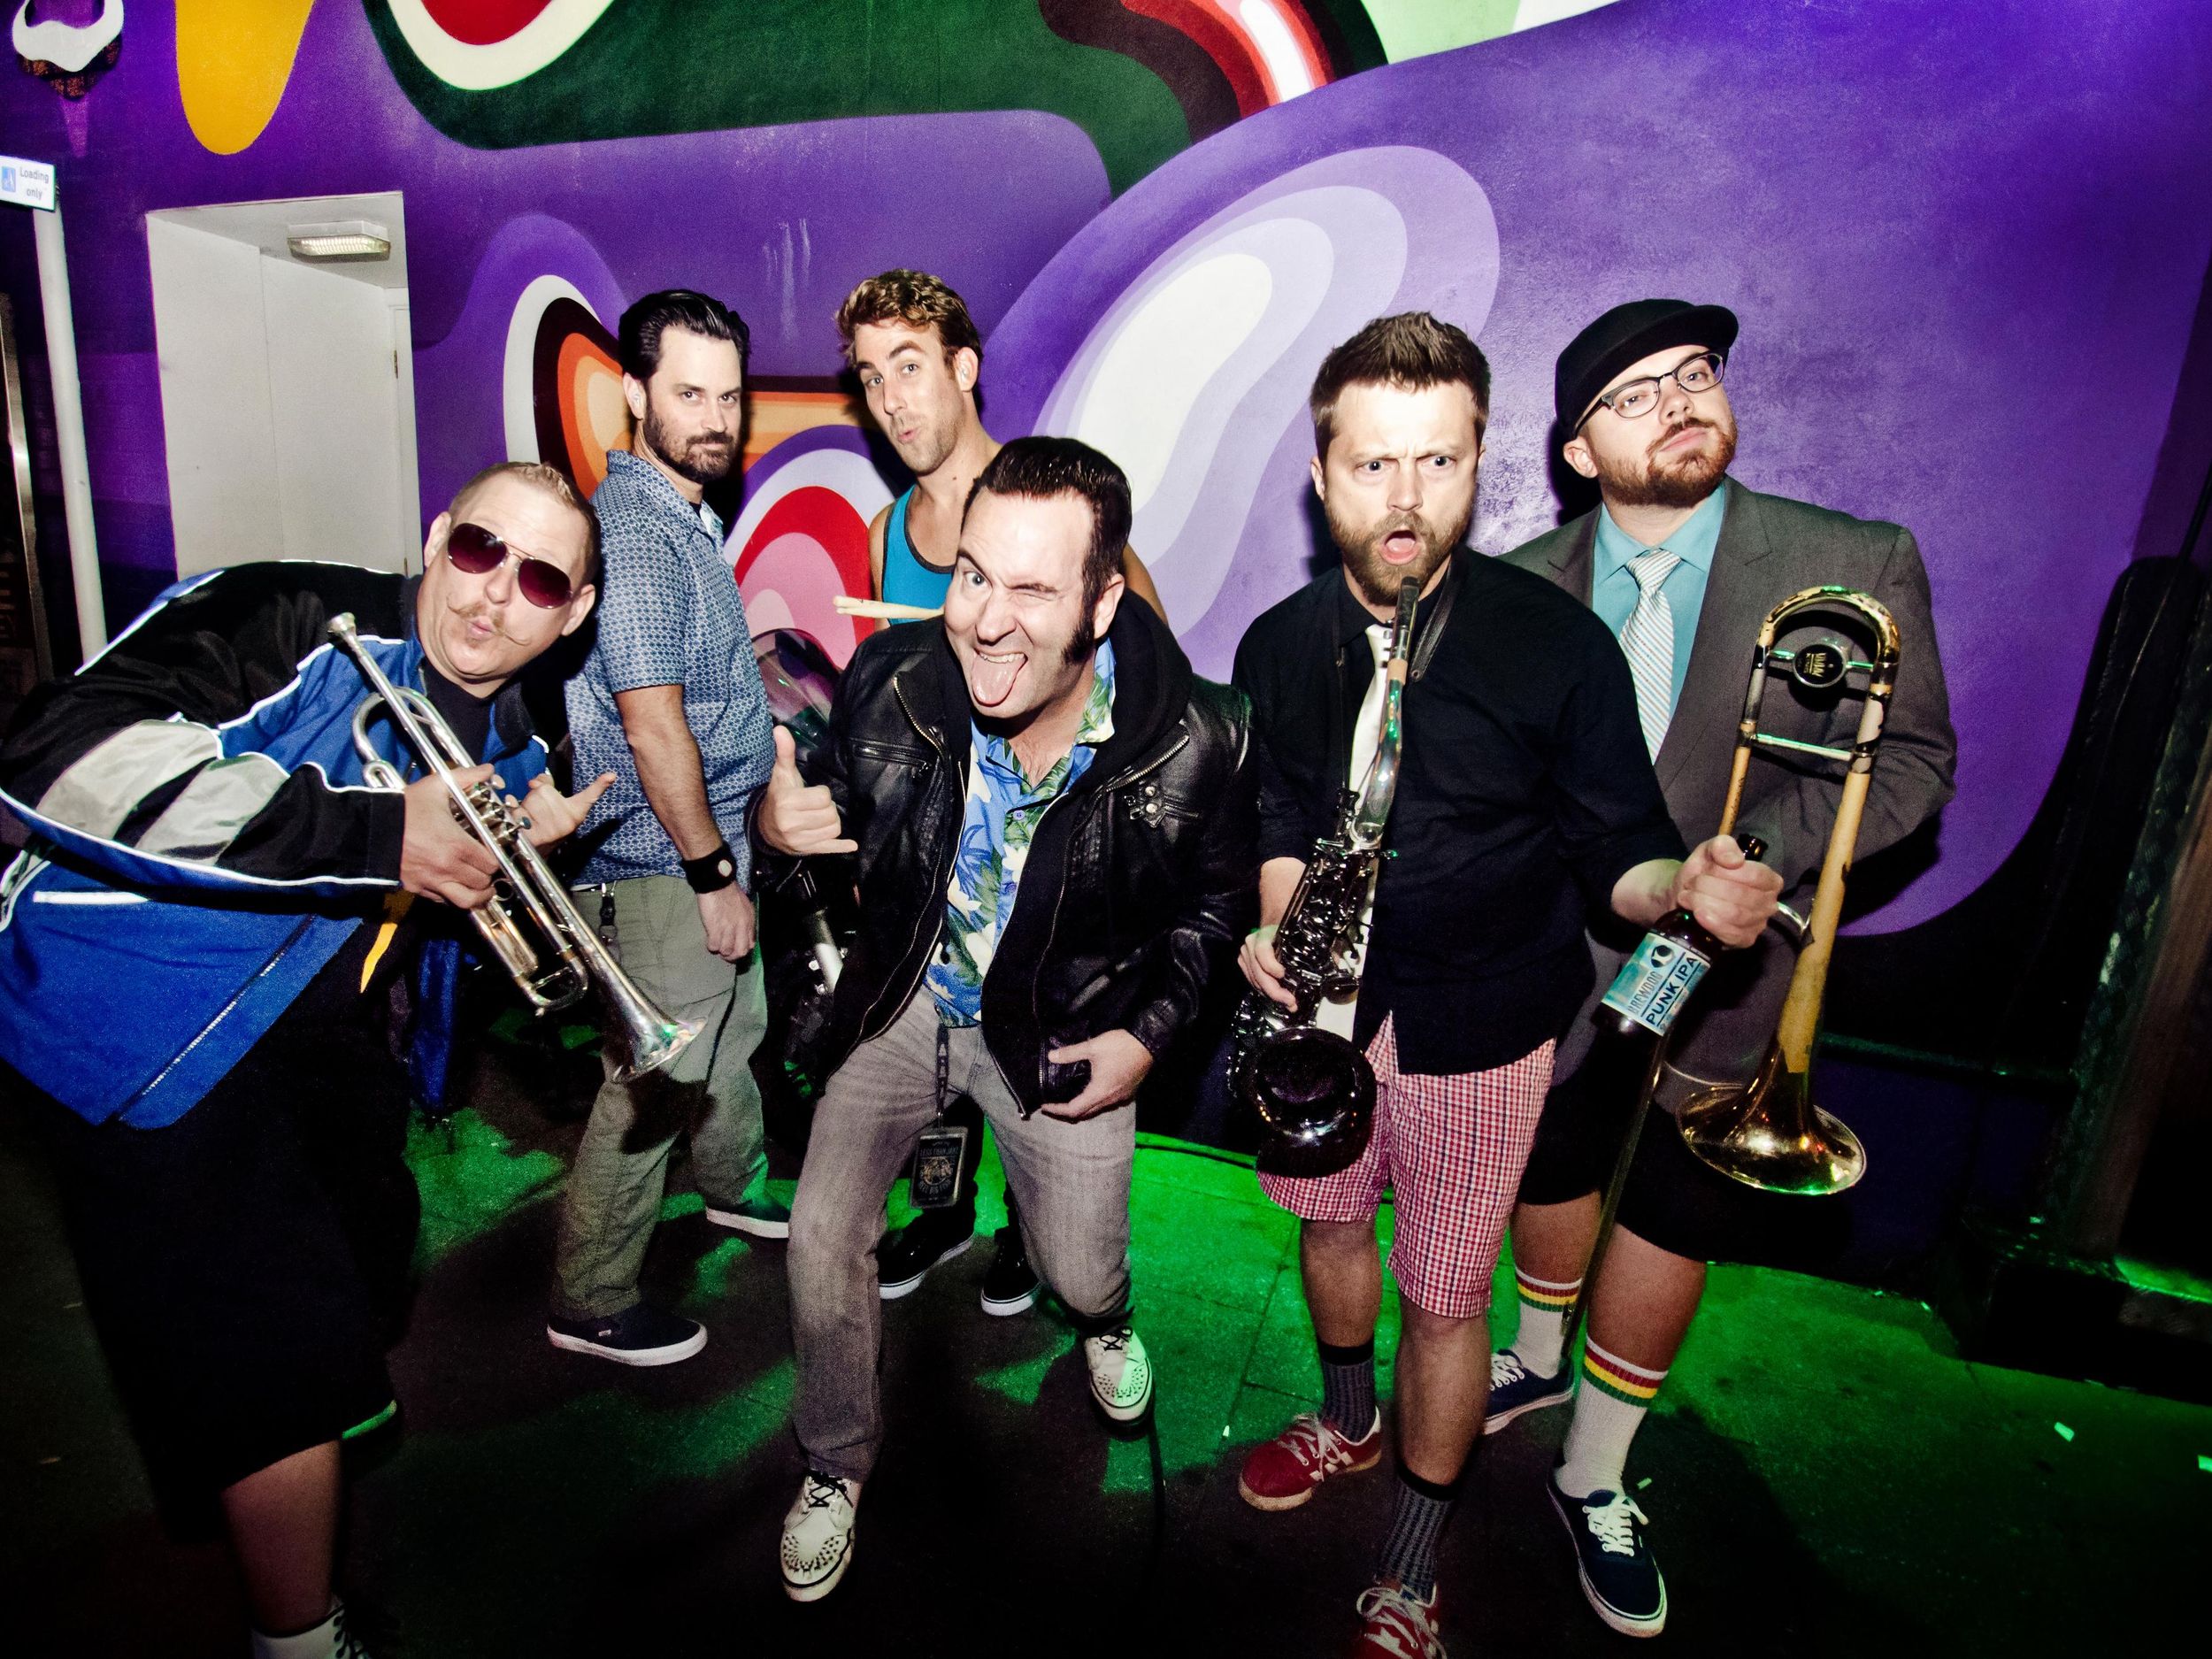 Reel Big Fish looks to capture their vintage sound at Knitting